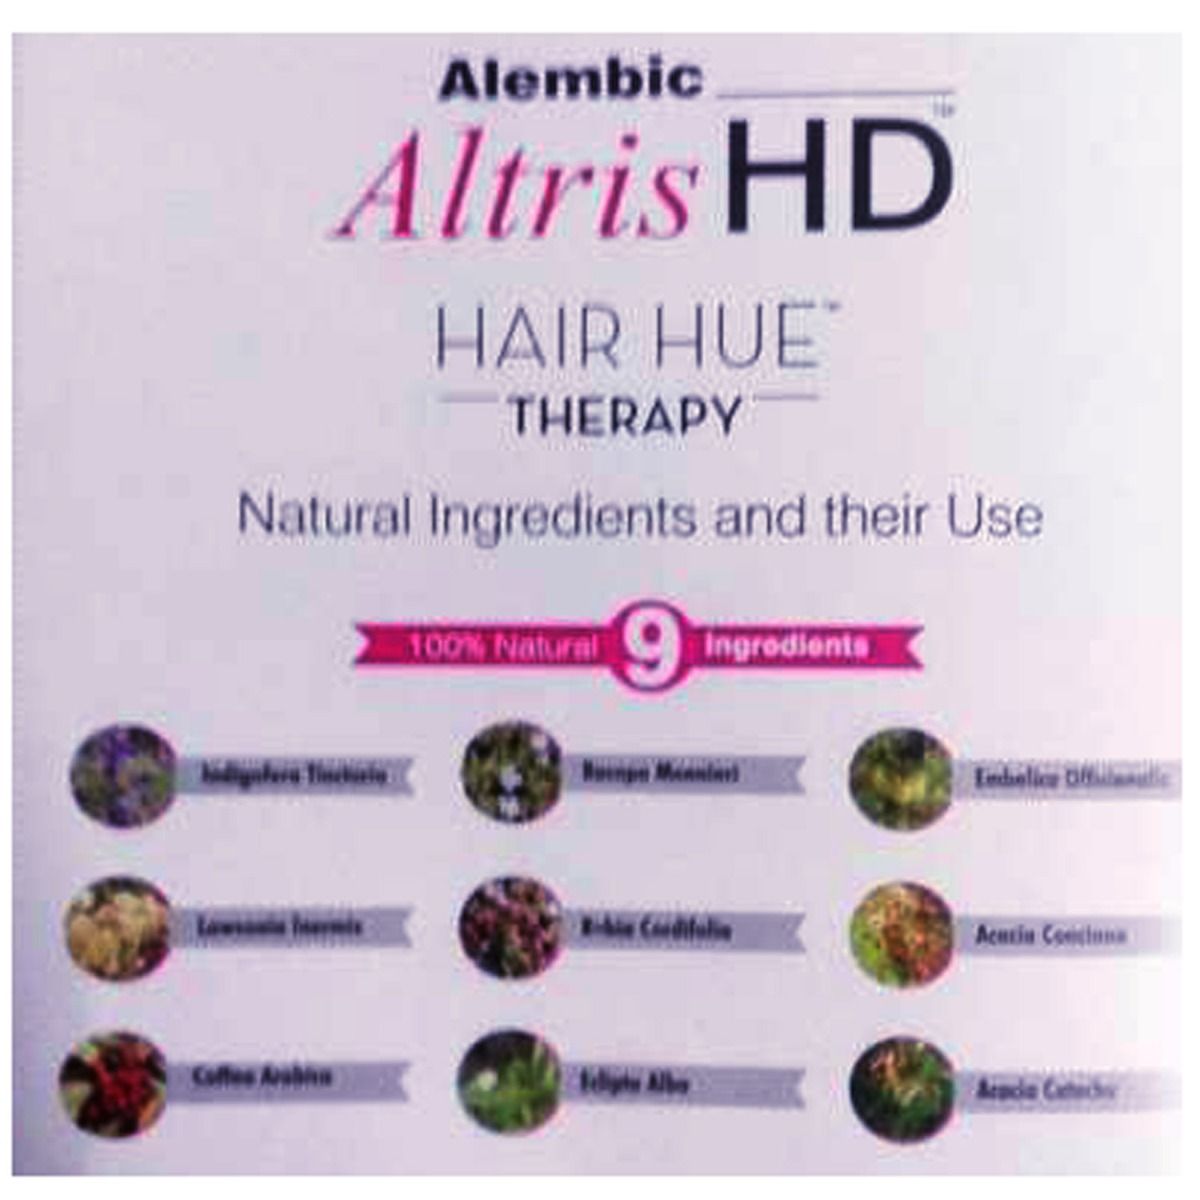 Alembic Altris HD, Hair Hue Therapy Dark Brown, 150 gm (3 sachets x 50 gm)  Price, Uses, Side Effects, Composition - Apollo Pharmacy